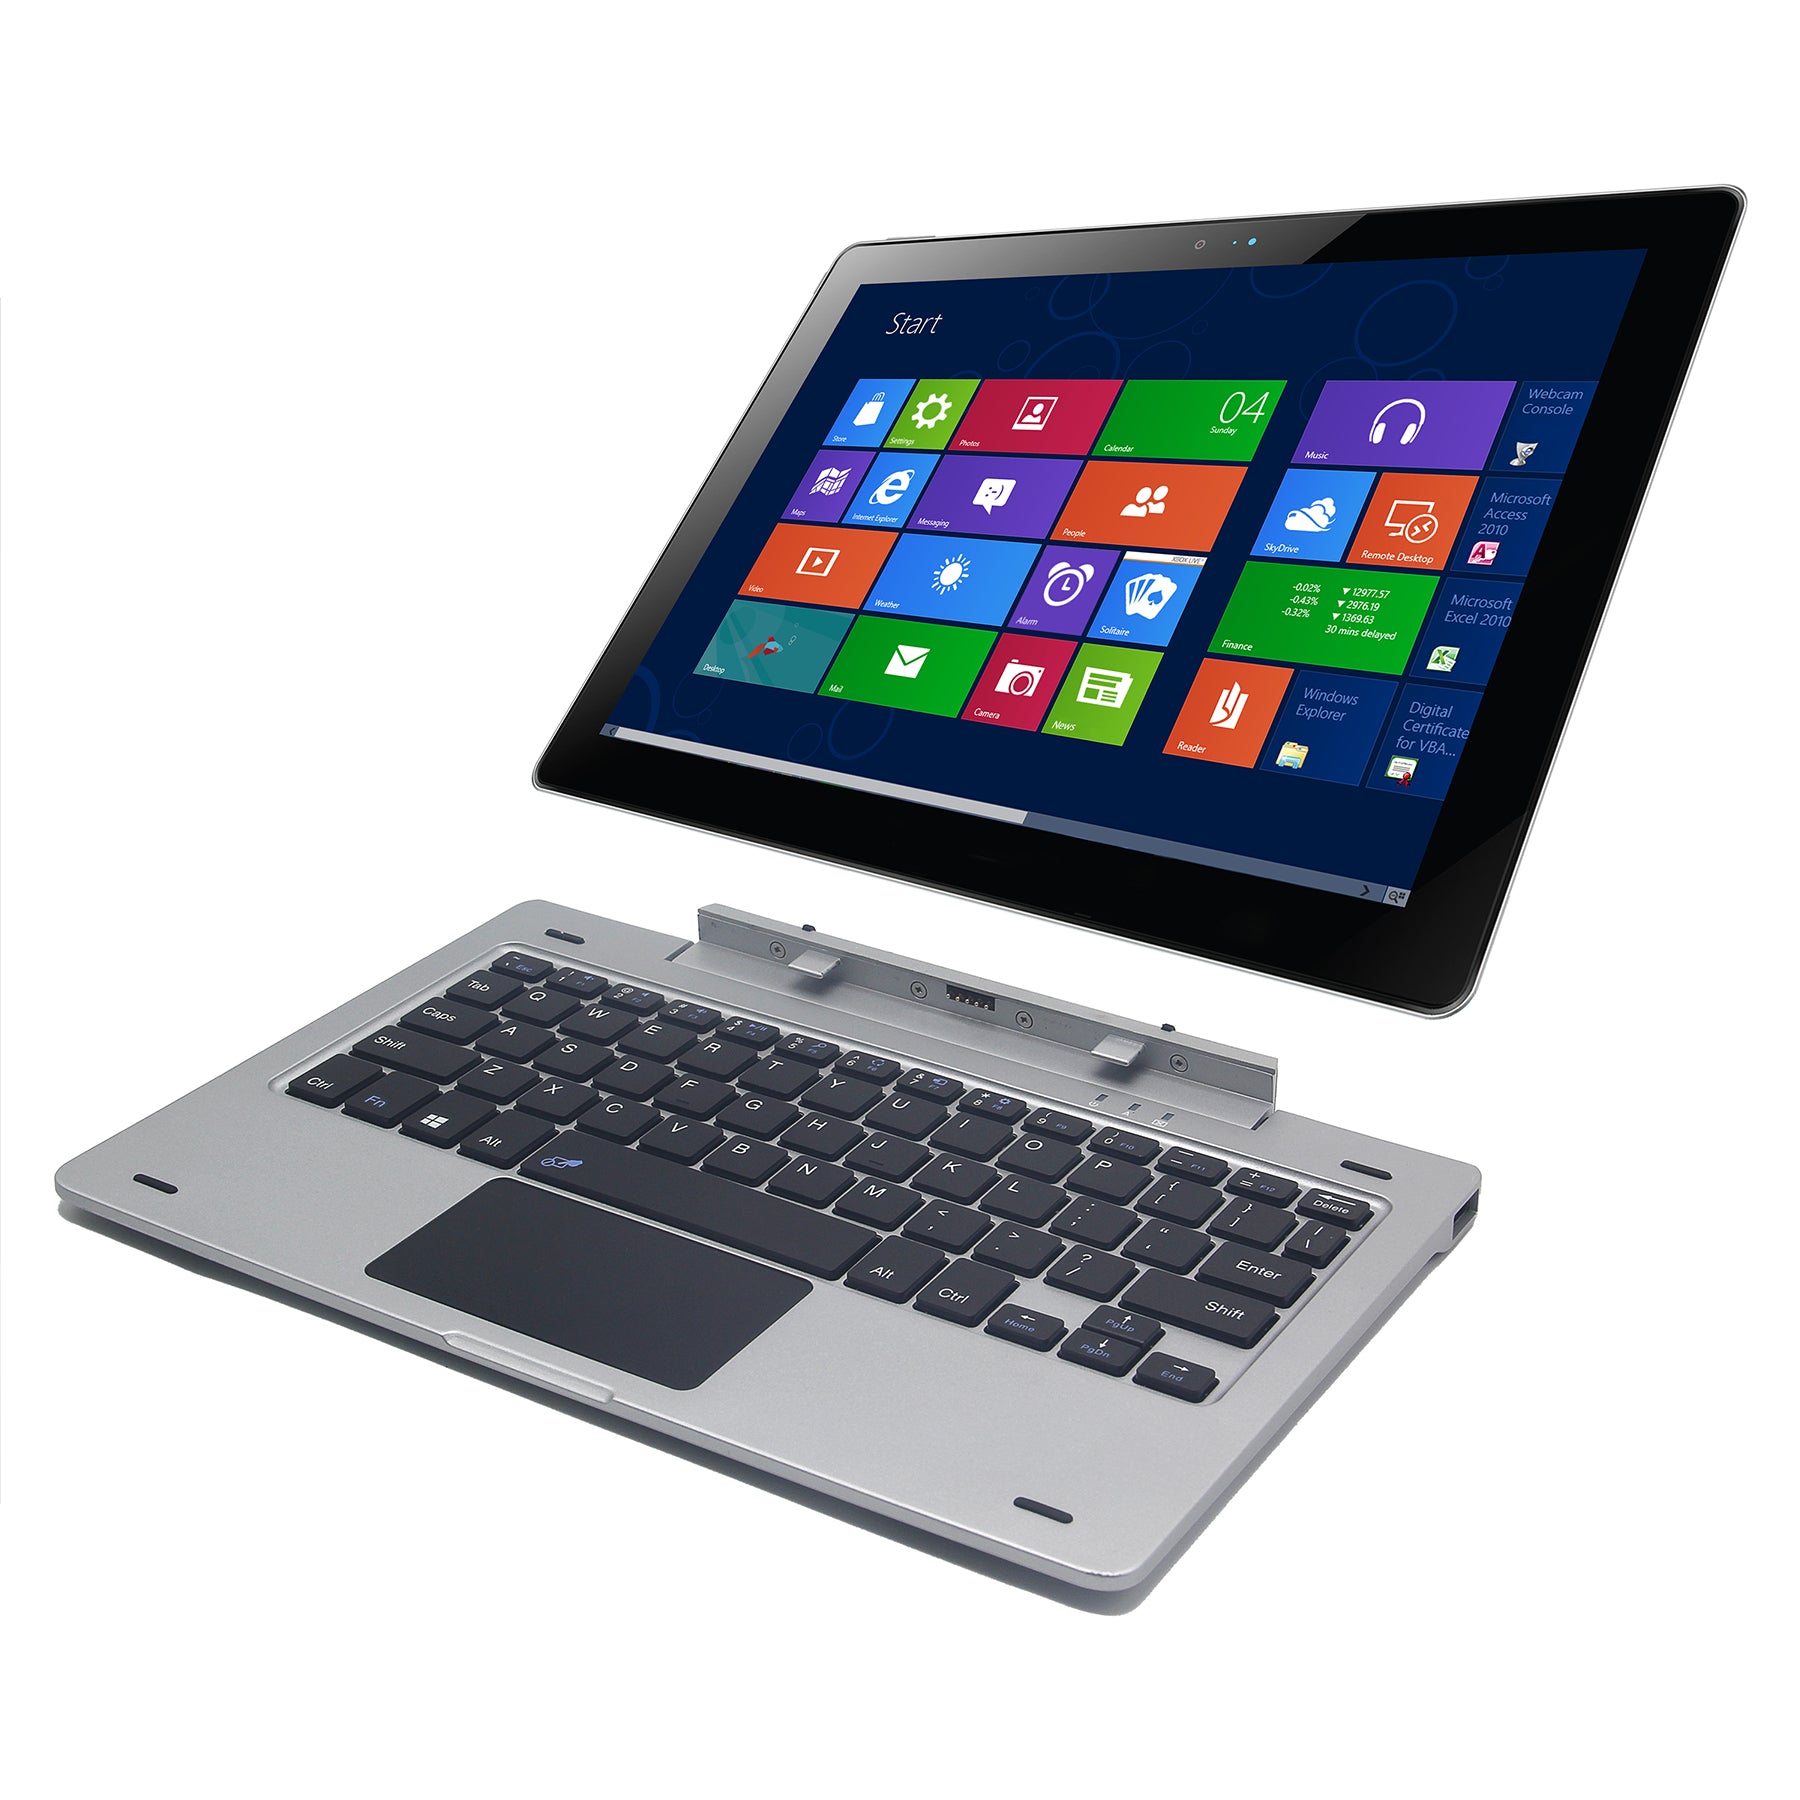 10.1” Windows Tablet and Keyboard – Supersonic Inc